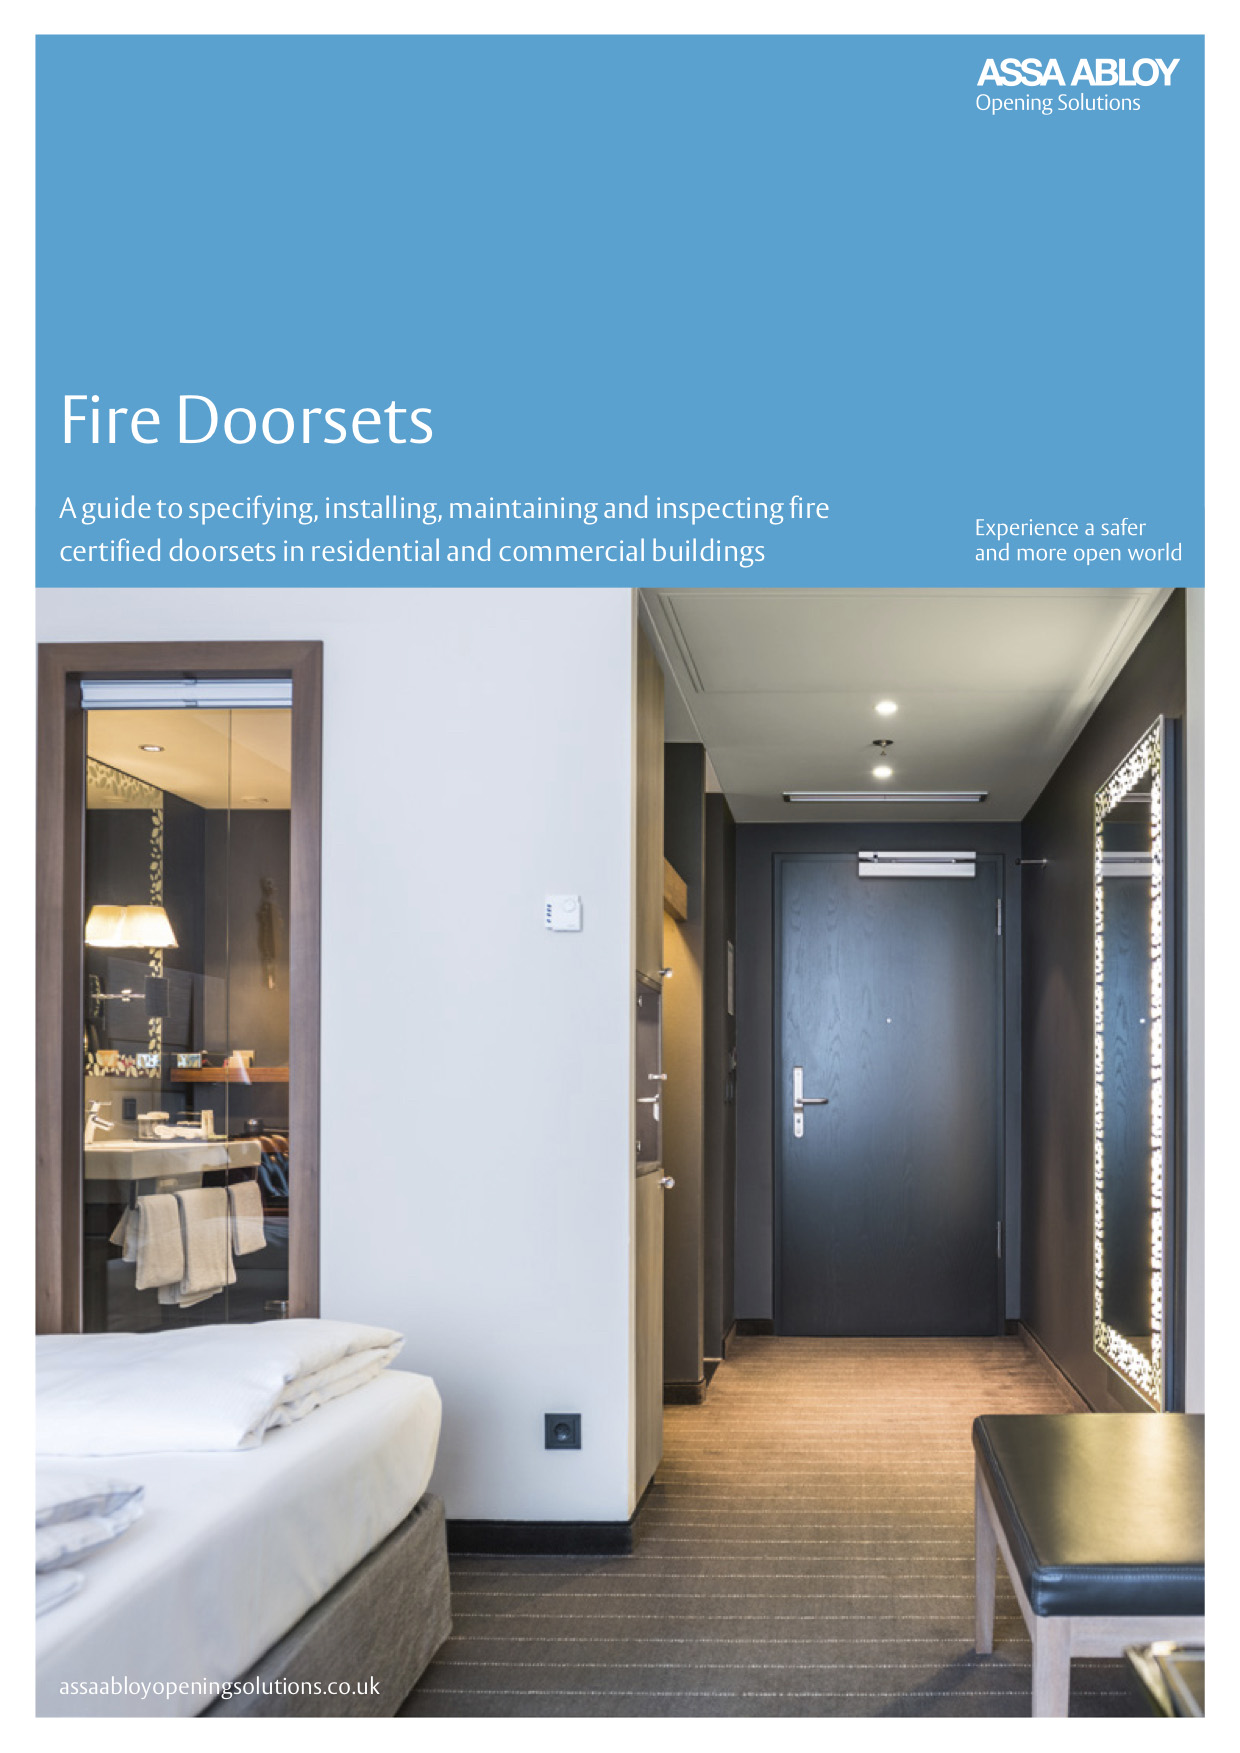 ASSA ABLOY Opening Solutions educating the industry with Fire Door Guide